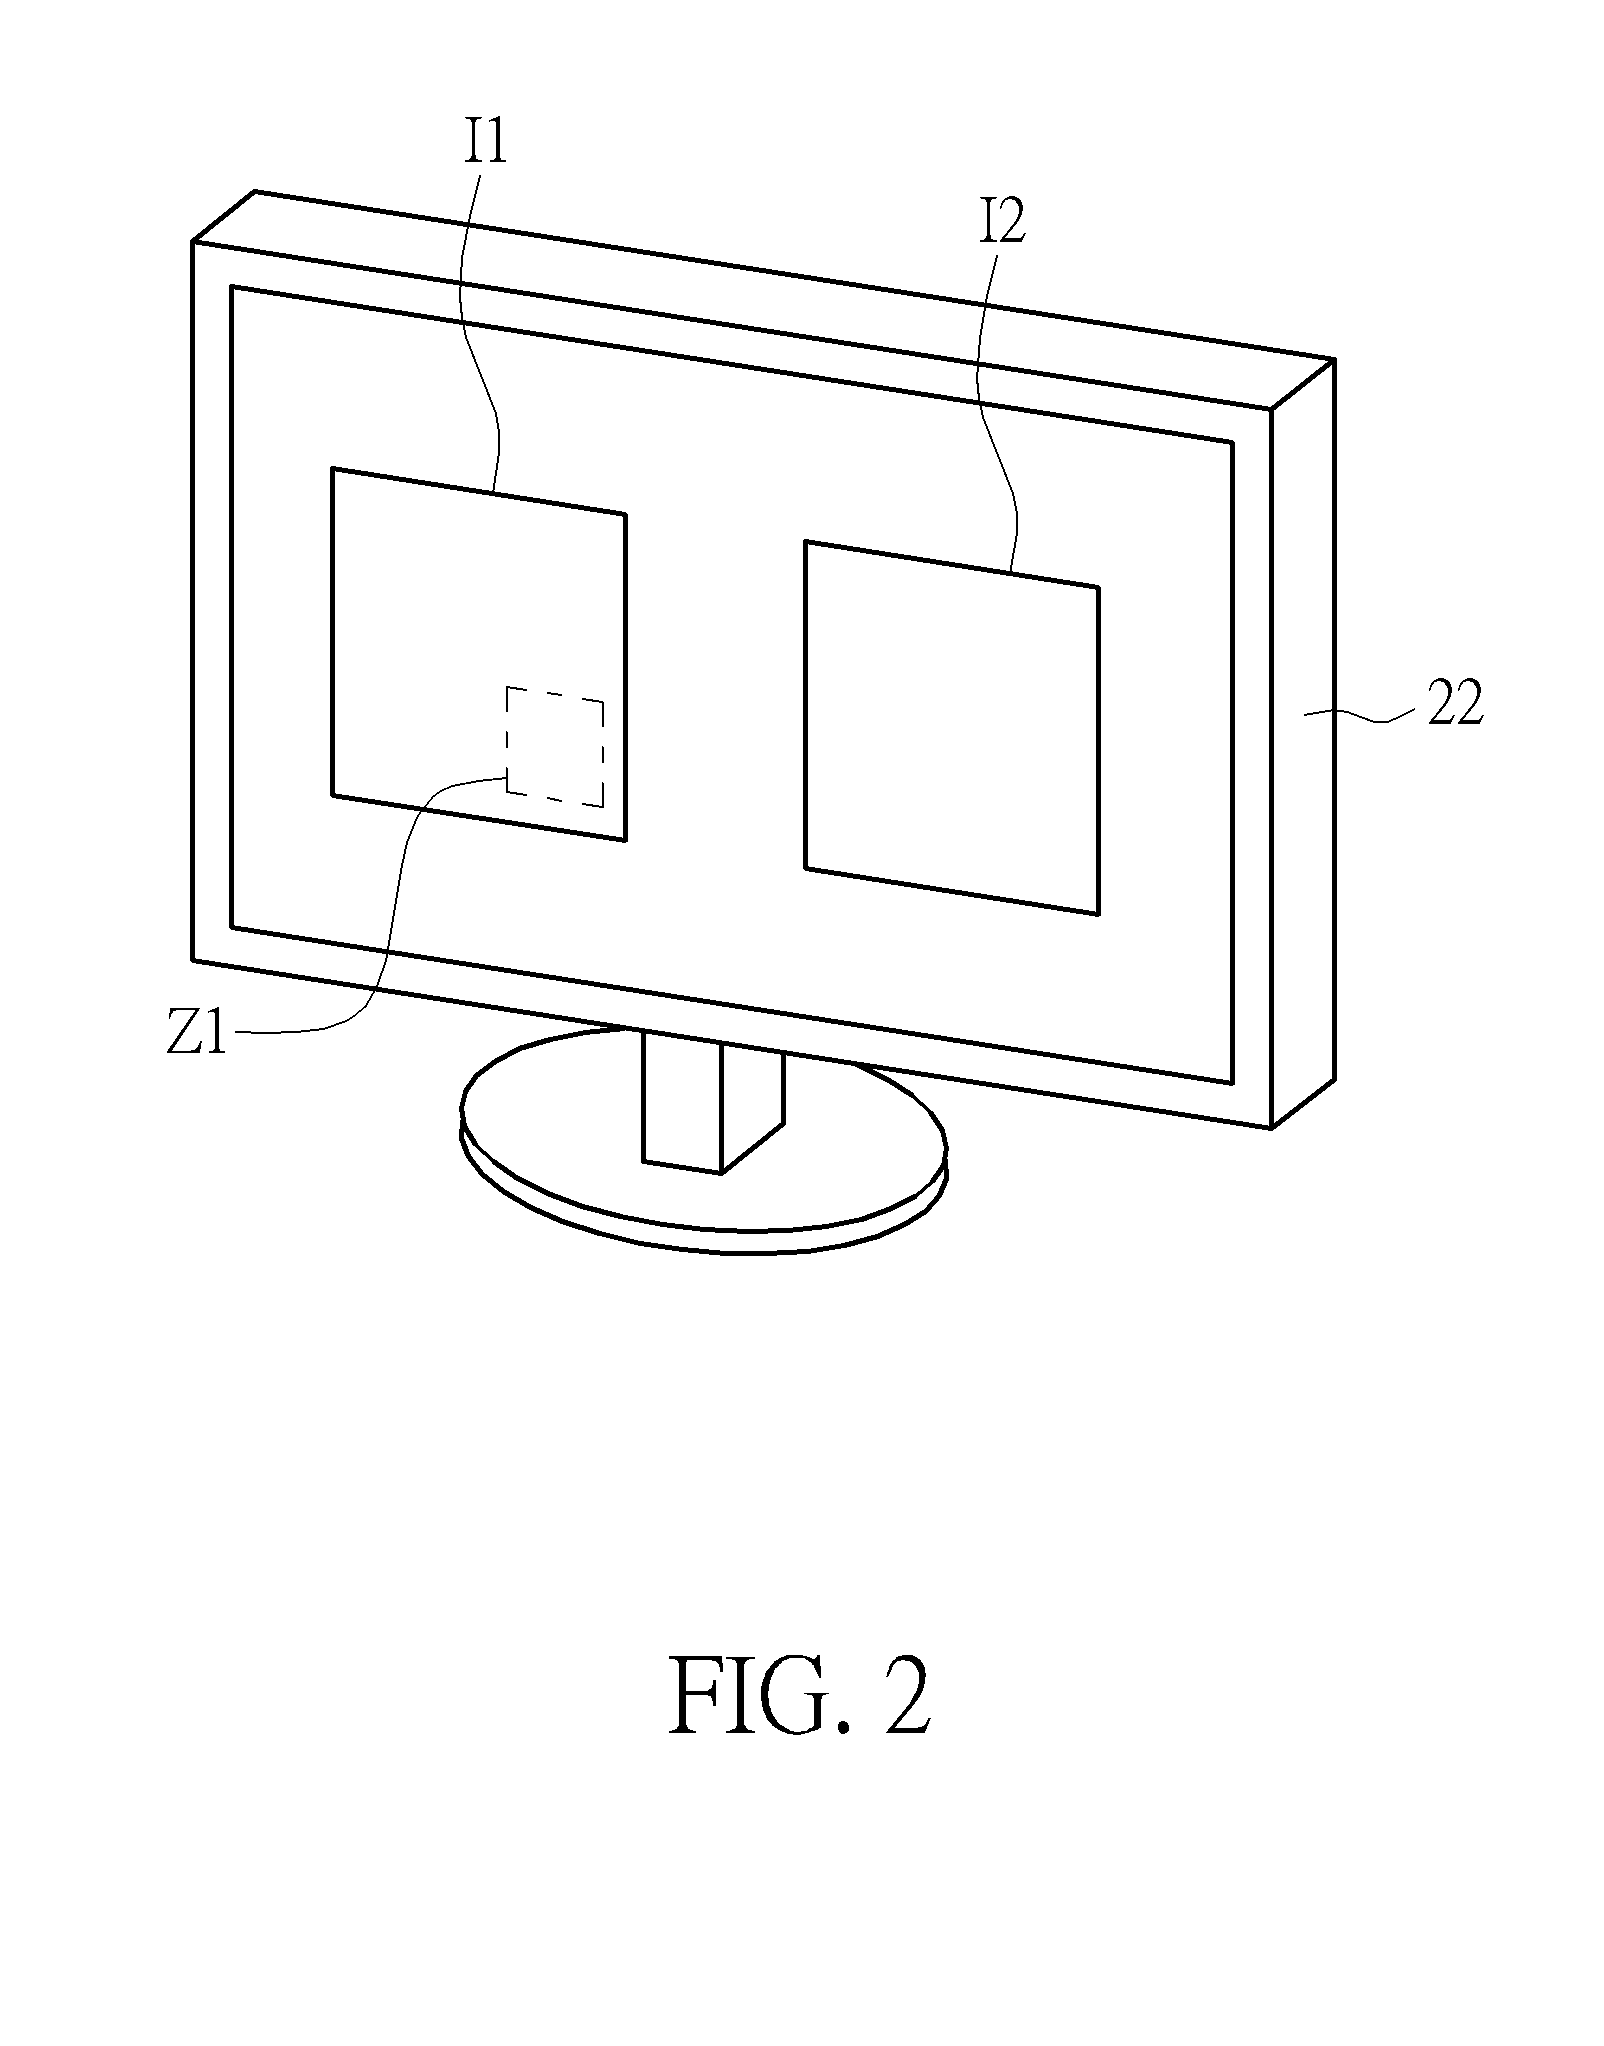 Camera system with a full view monitoring function